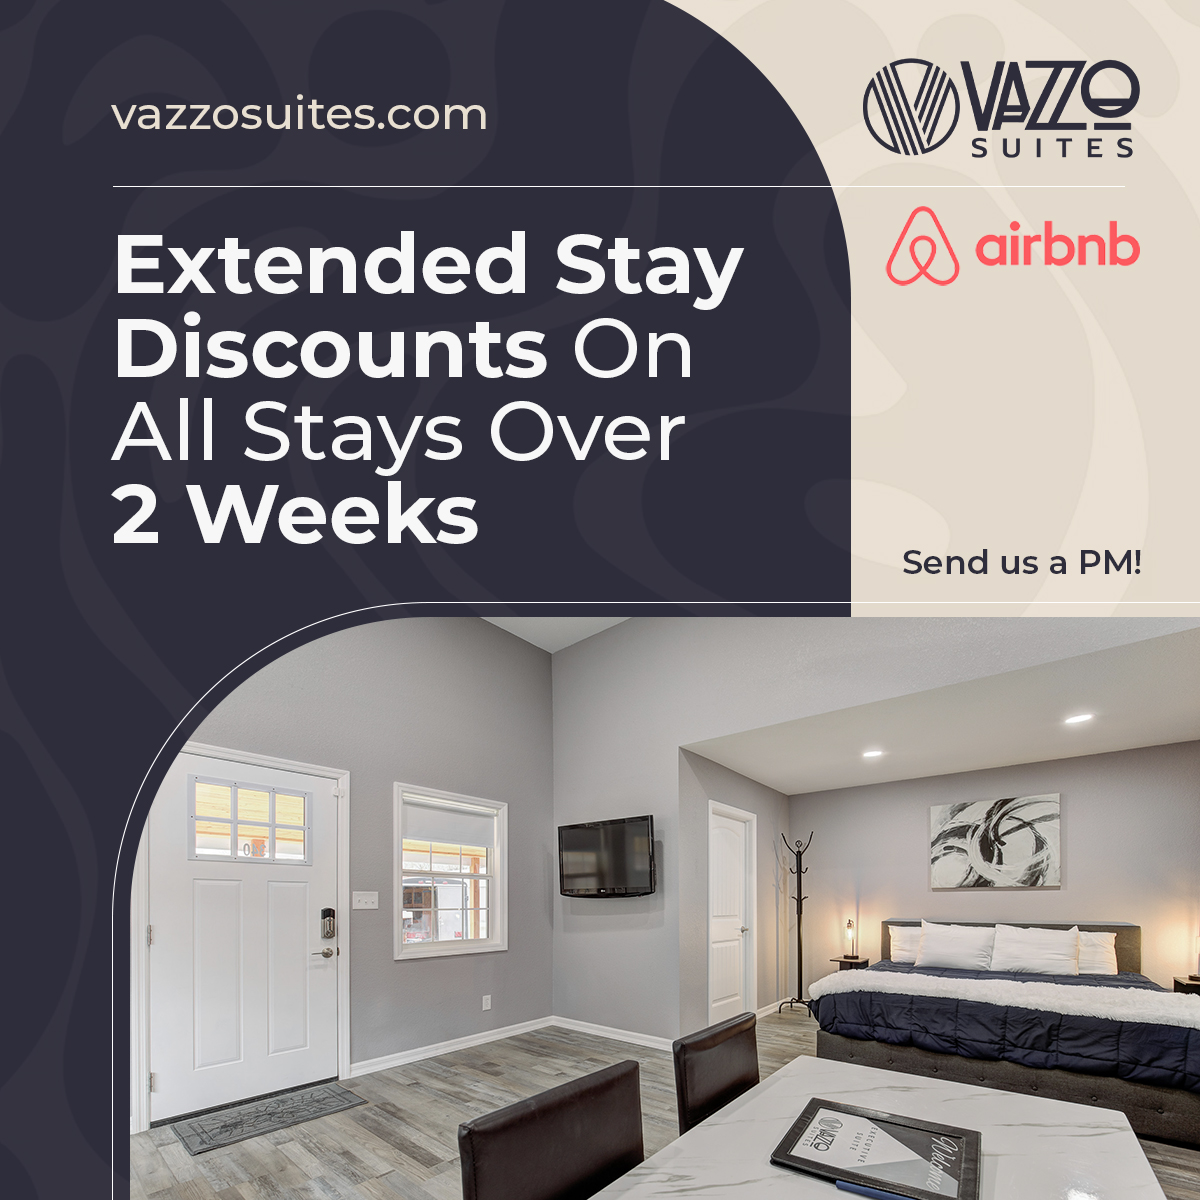 VAZZO Suites in Seneca, Missouri offers discounts for extended stays over 2 weeks! Send us a private message with your requested dates to book. 
vazzosuites.com
#VAZZOsuites #Motel #Rental #ExtendedStays #Discount